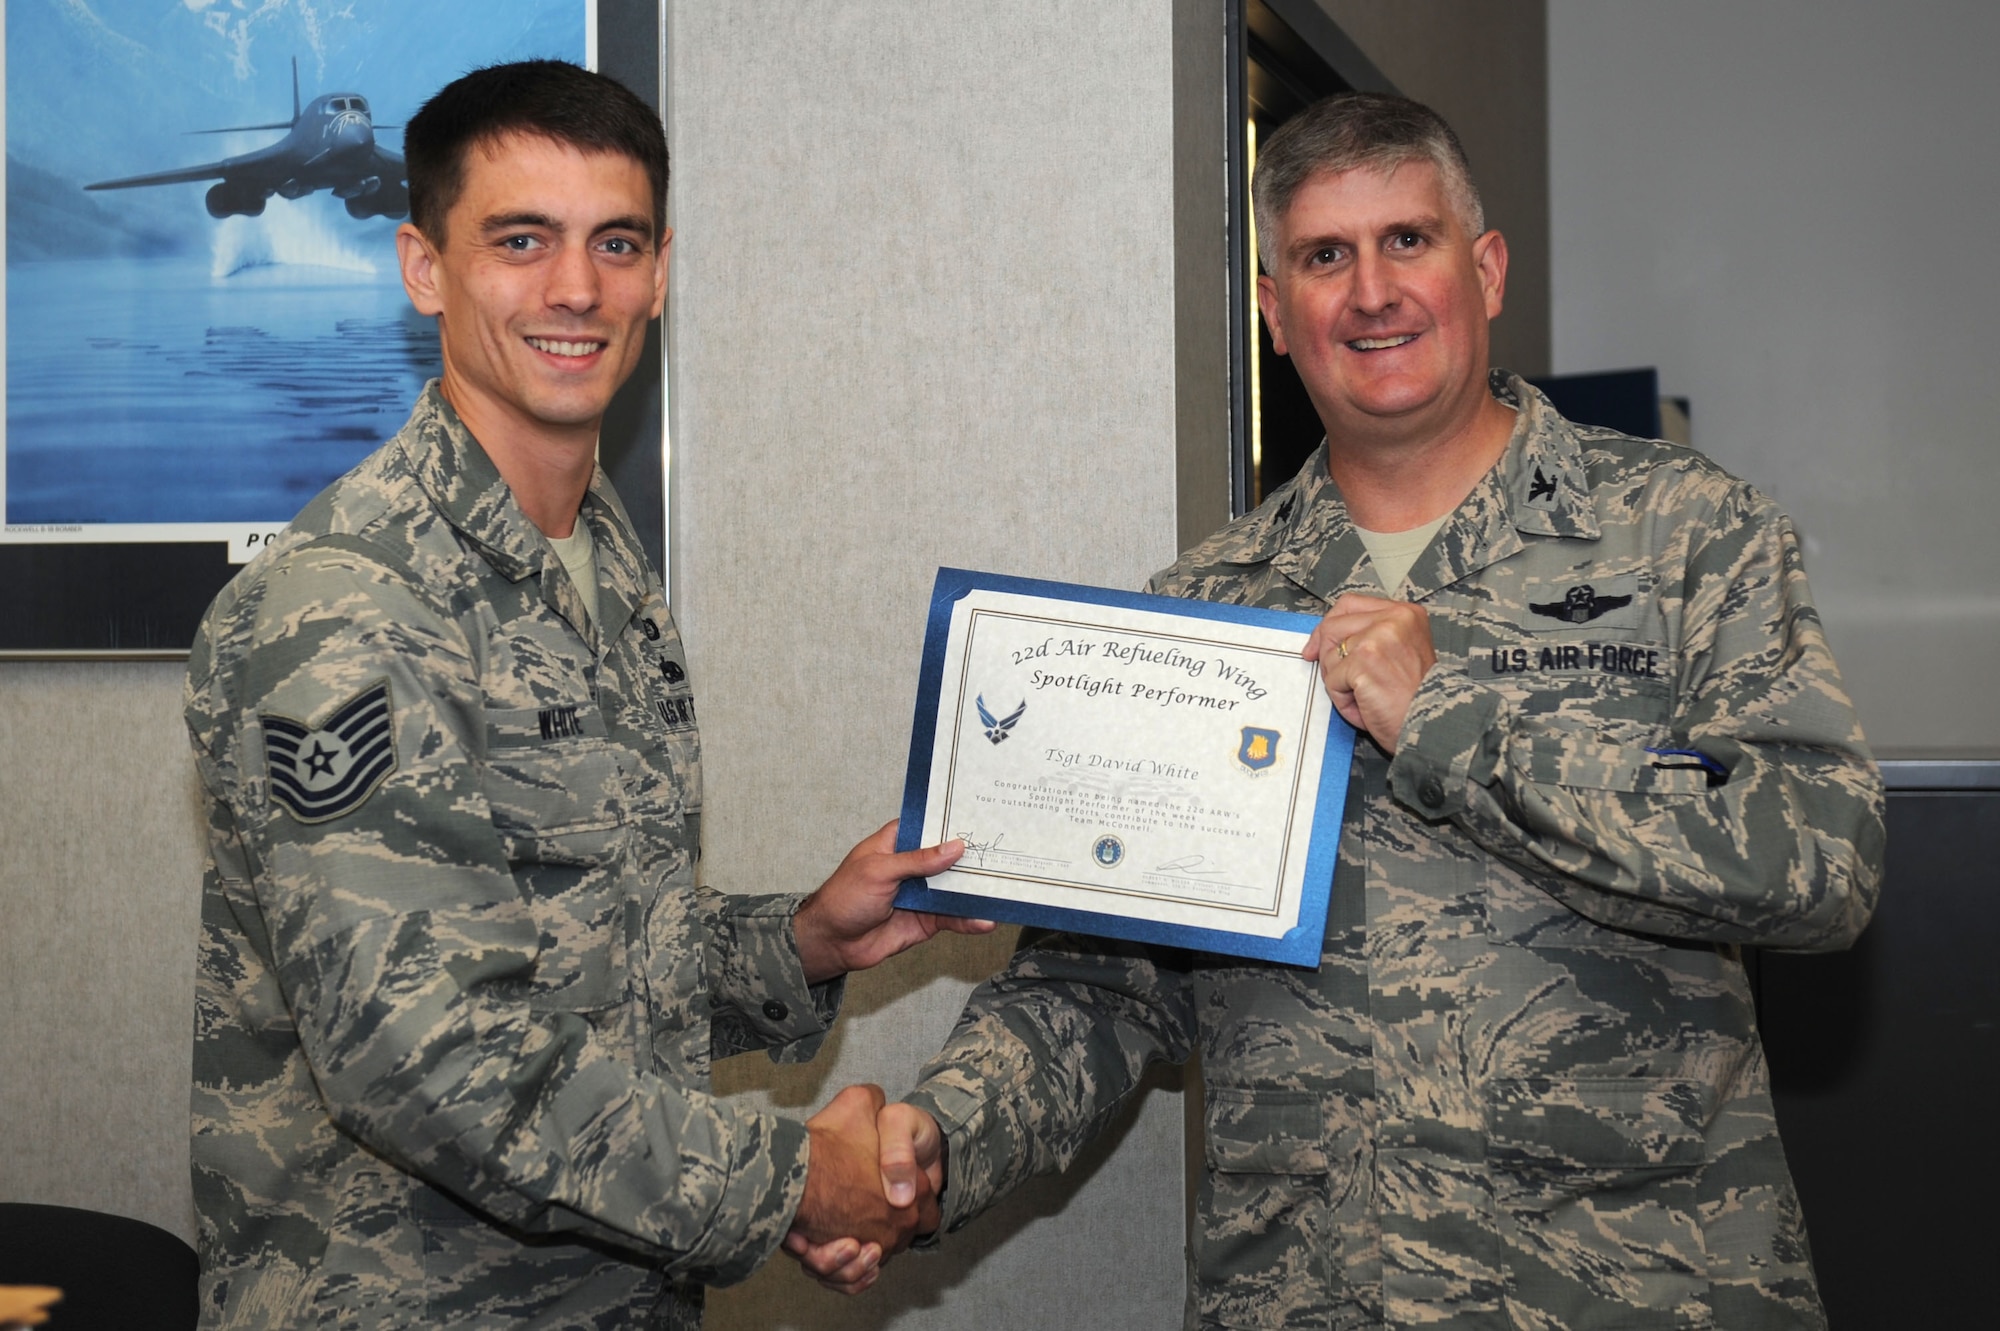 Tech. Sgt. David White, 22nd Contracting squadron services flight NCO in-charge, poses with Col. Albert Miller, 22nd Air Refueling Wing commander, Sept. 23, 2015, at McConnell Air Force Base, Kan. White was selected to be the spotlight performer for the week of Sept. 20 -26. He is responsible for the award and administration of six contracts exceeding a total value of $13 million. (U.S. Air Force photo by Airman 1st Class Tara Fadenrecht)